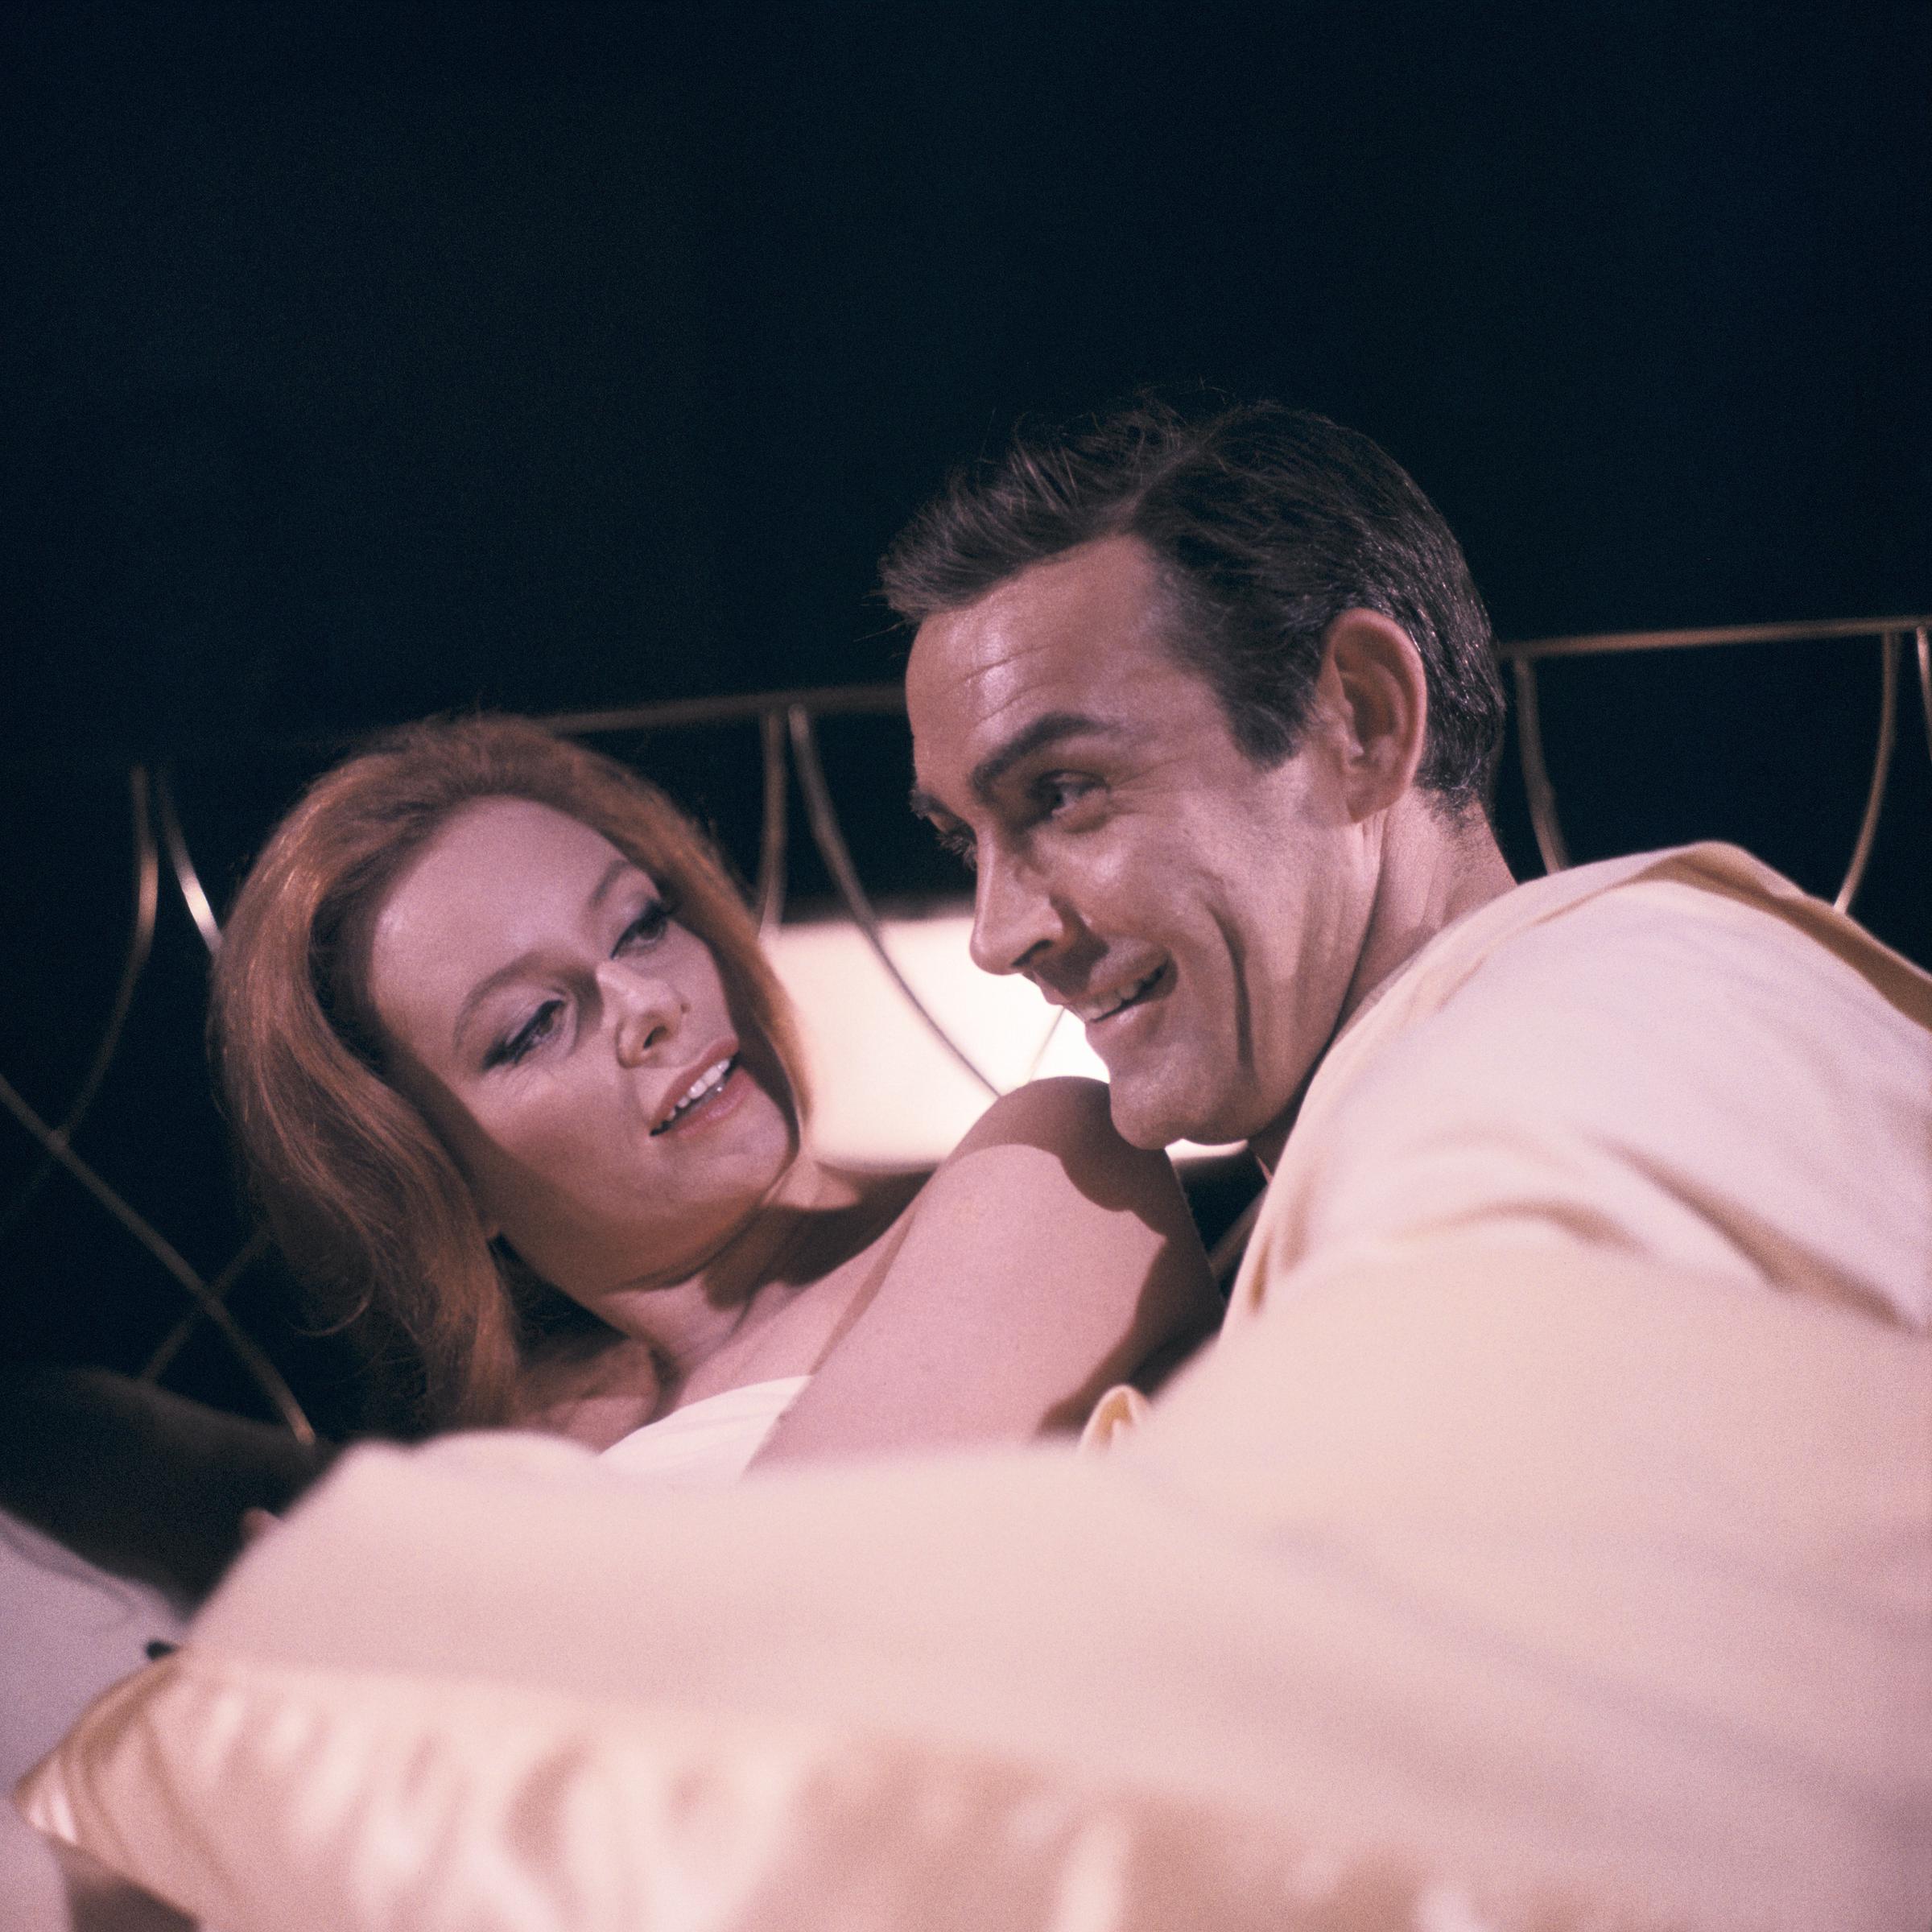 Luciana Paluzzi and Sean Connery in "Thunderball" in 1965. | Source: Getty Images